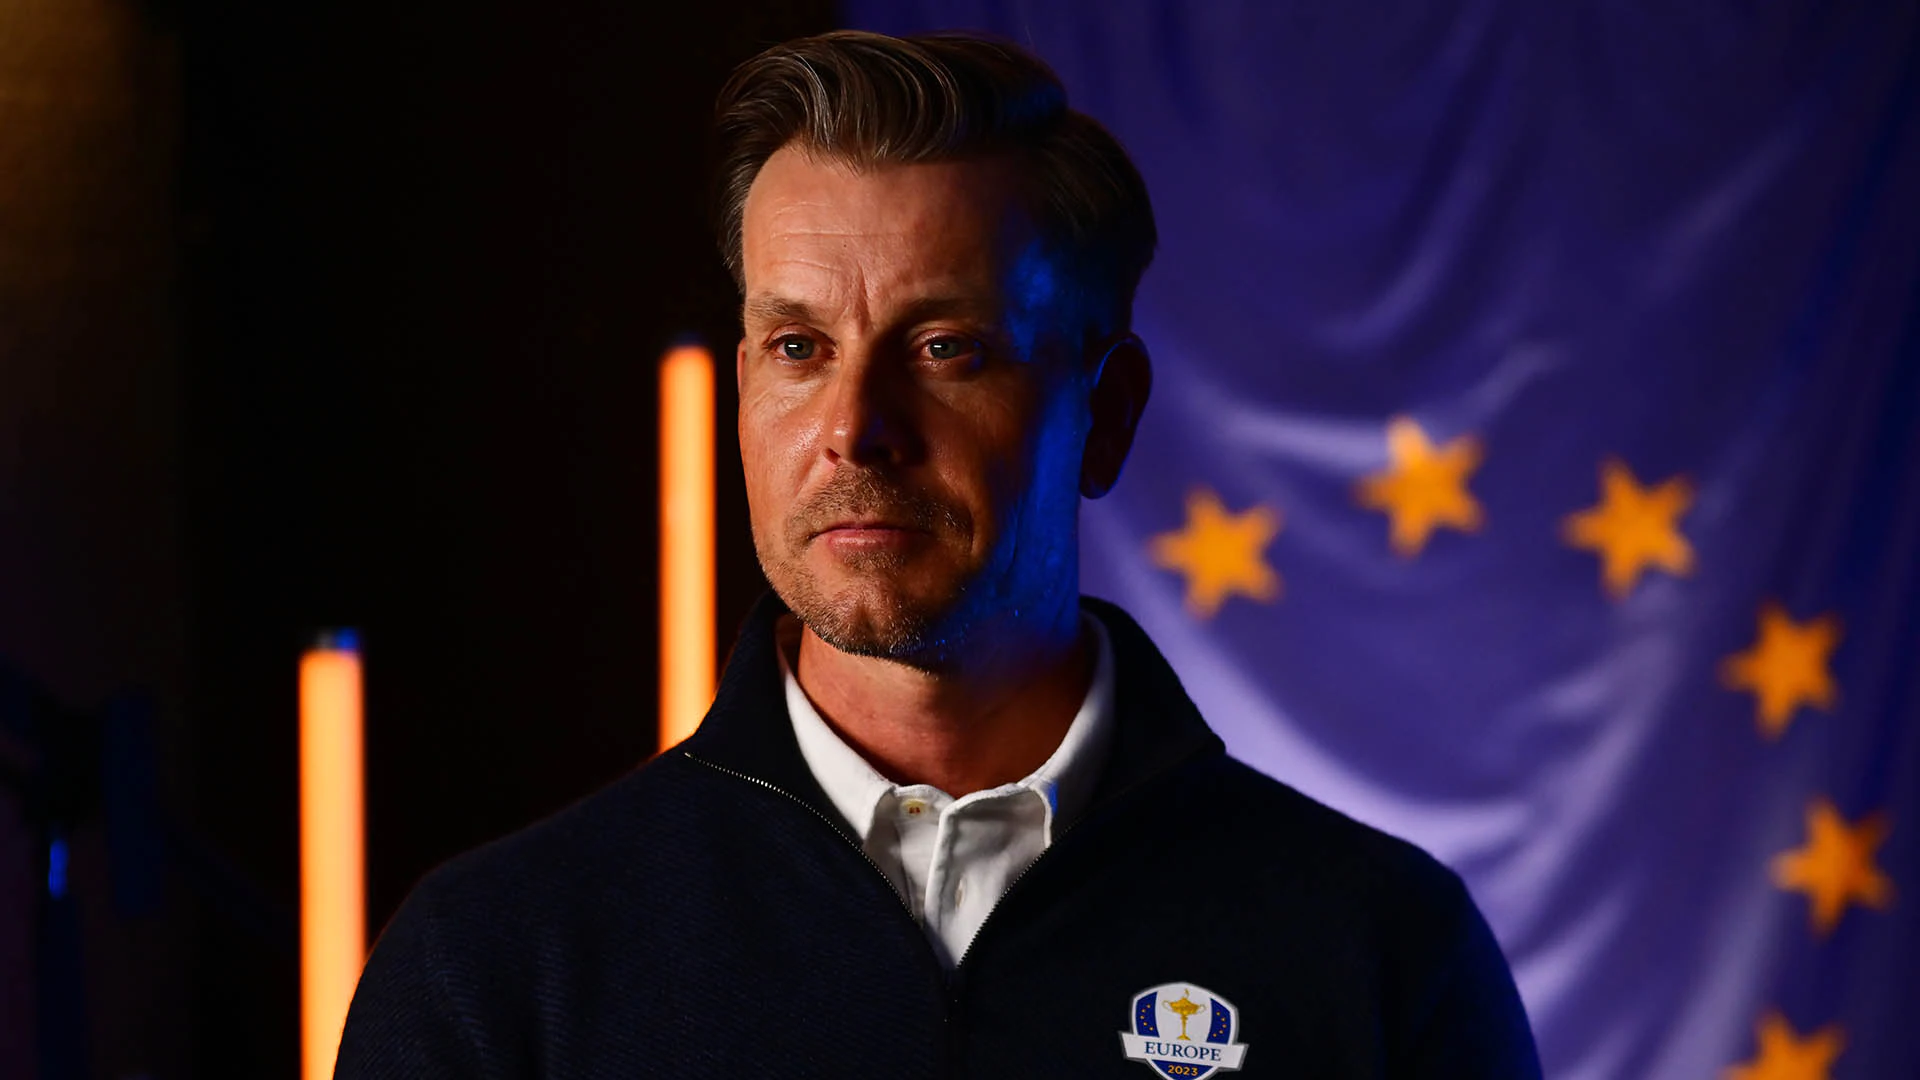 Report: Ryder Cup captain Henrik Stenson meeting with DPWT amid LIV rumors